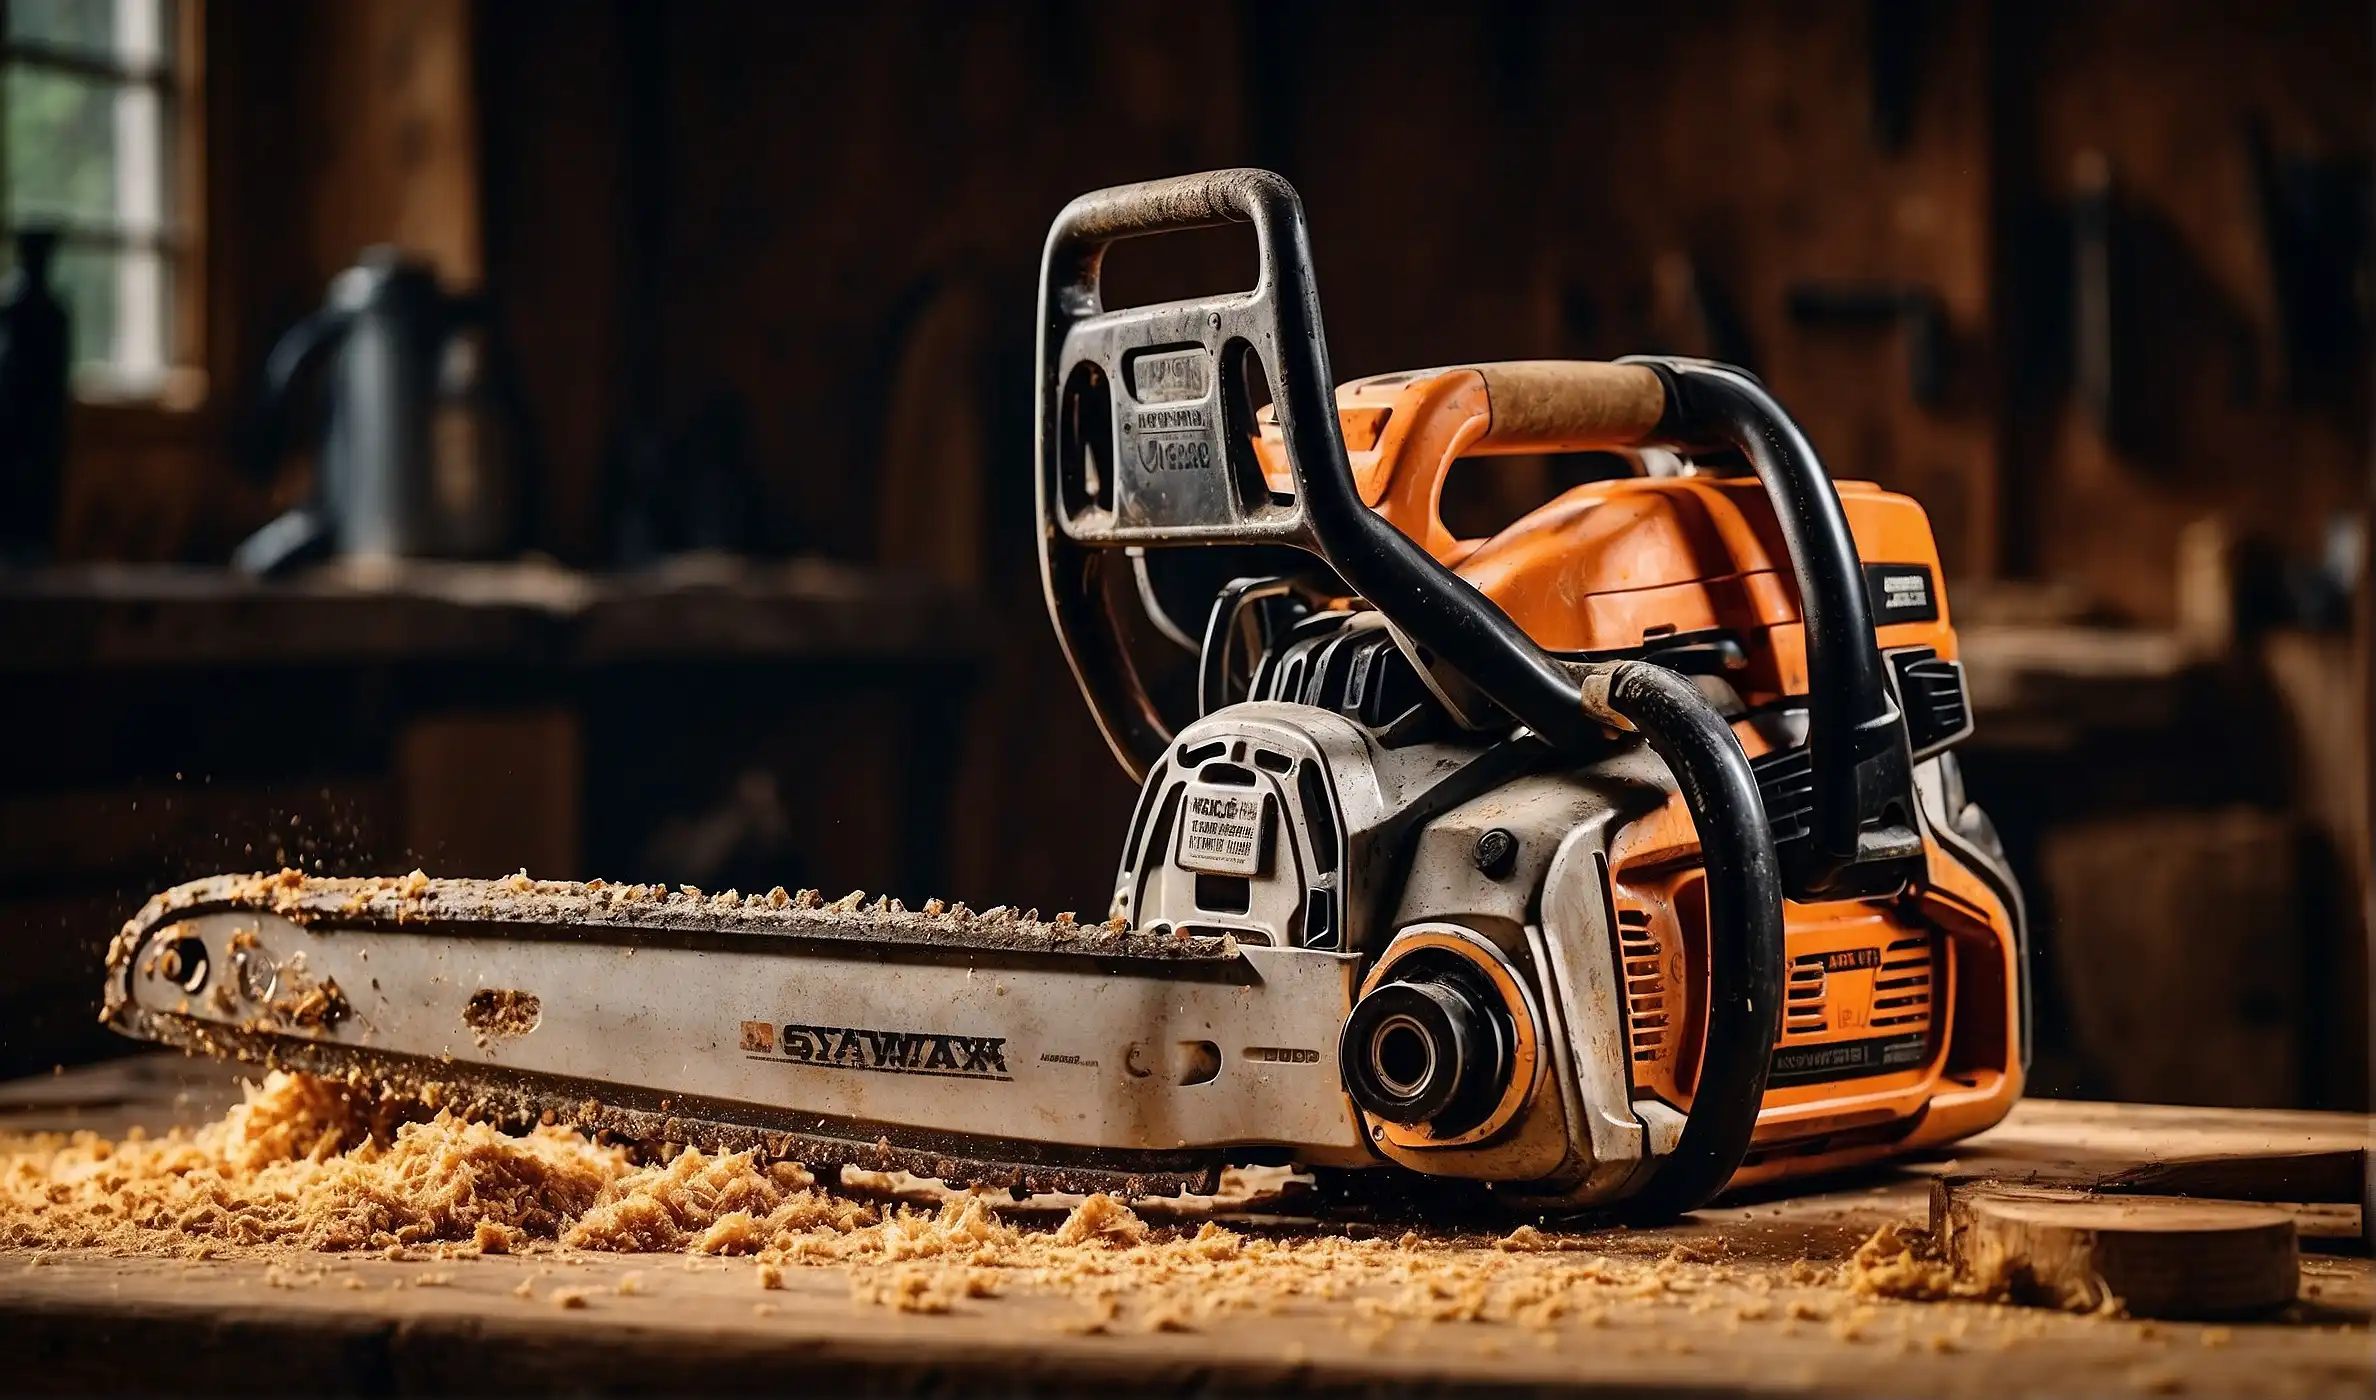 A rugged 14-inch chainsaw covered in sawdust and wood chips